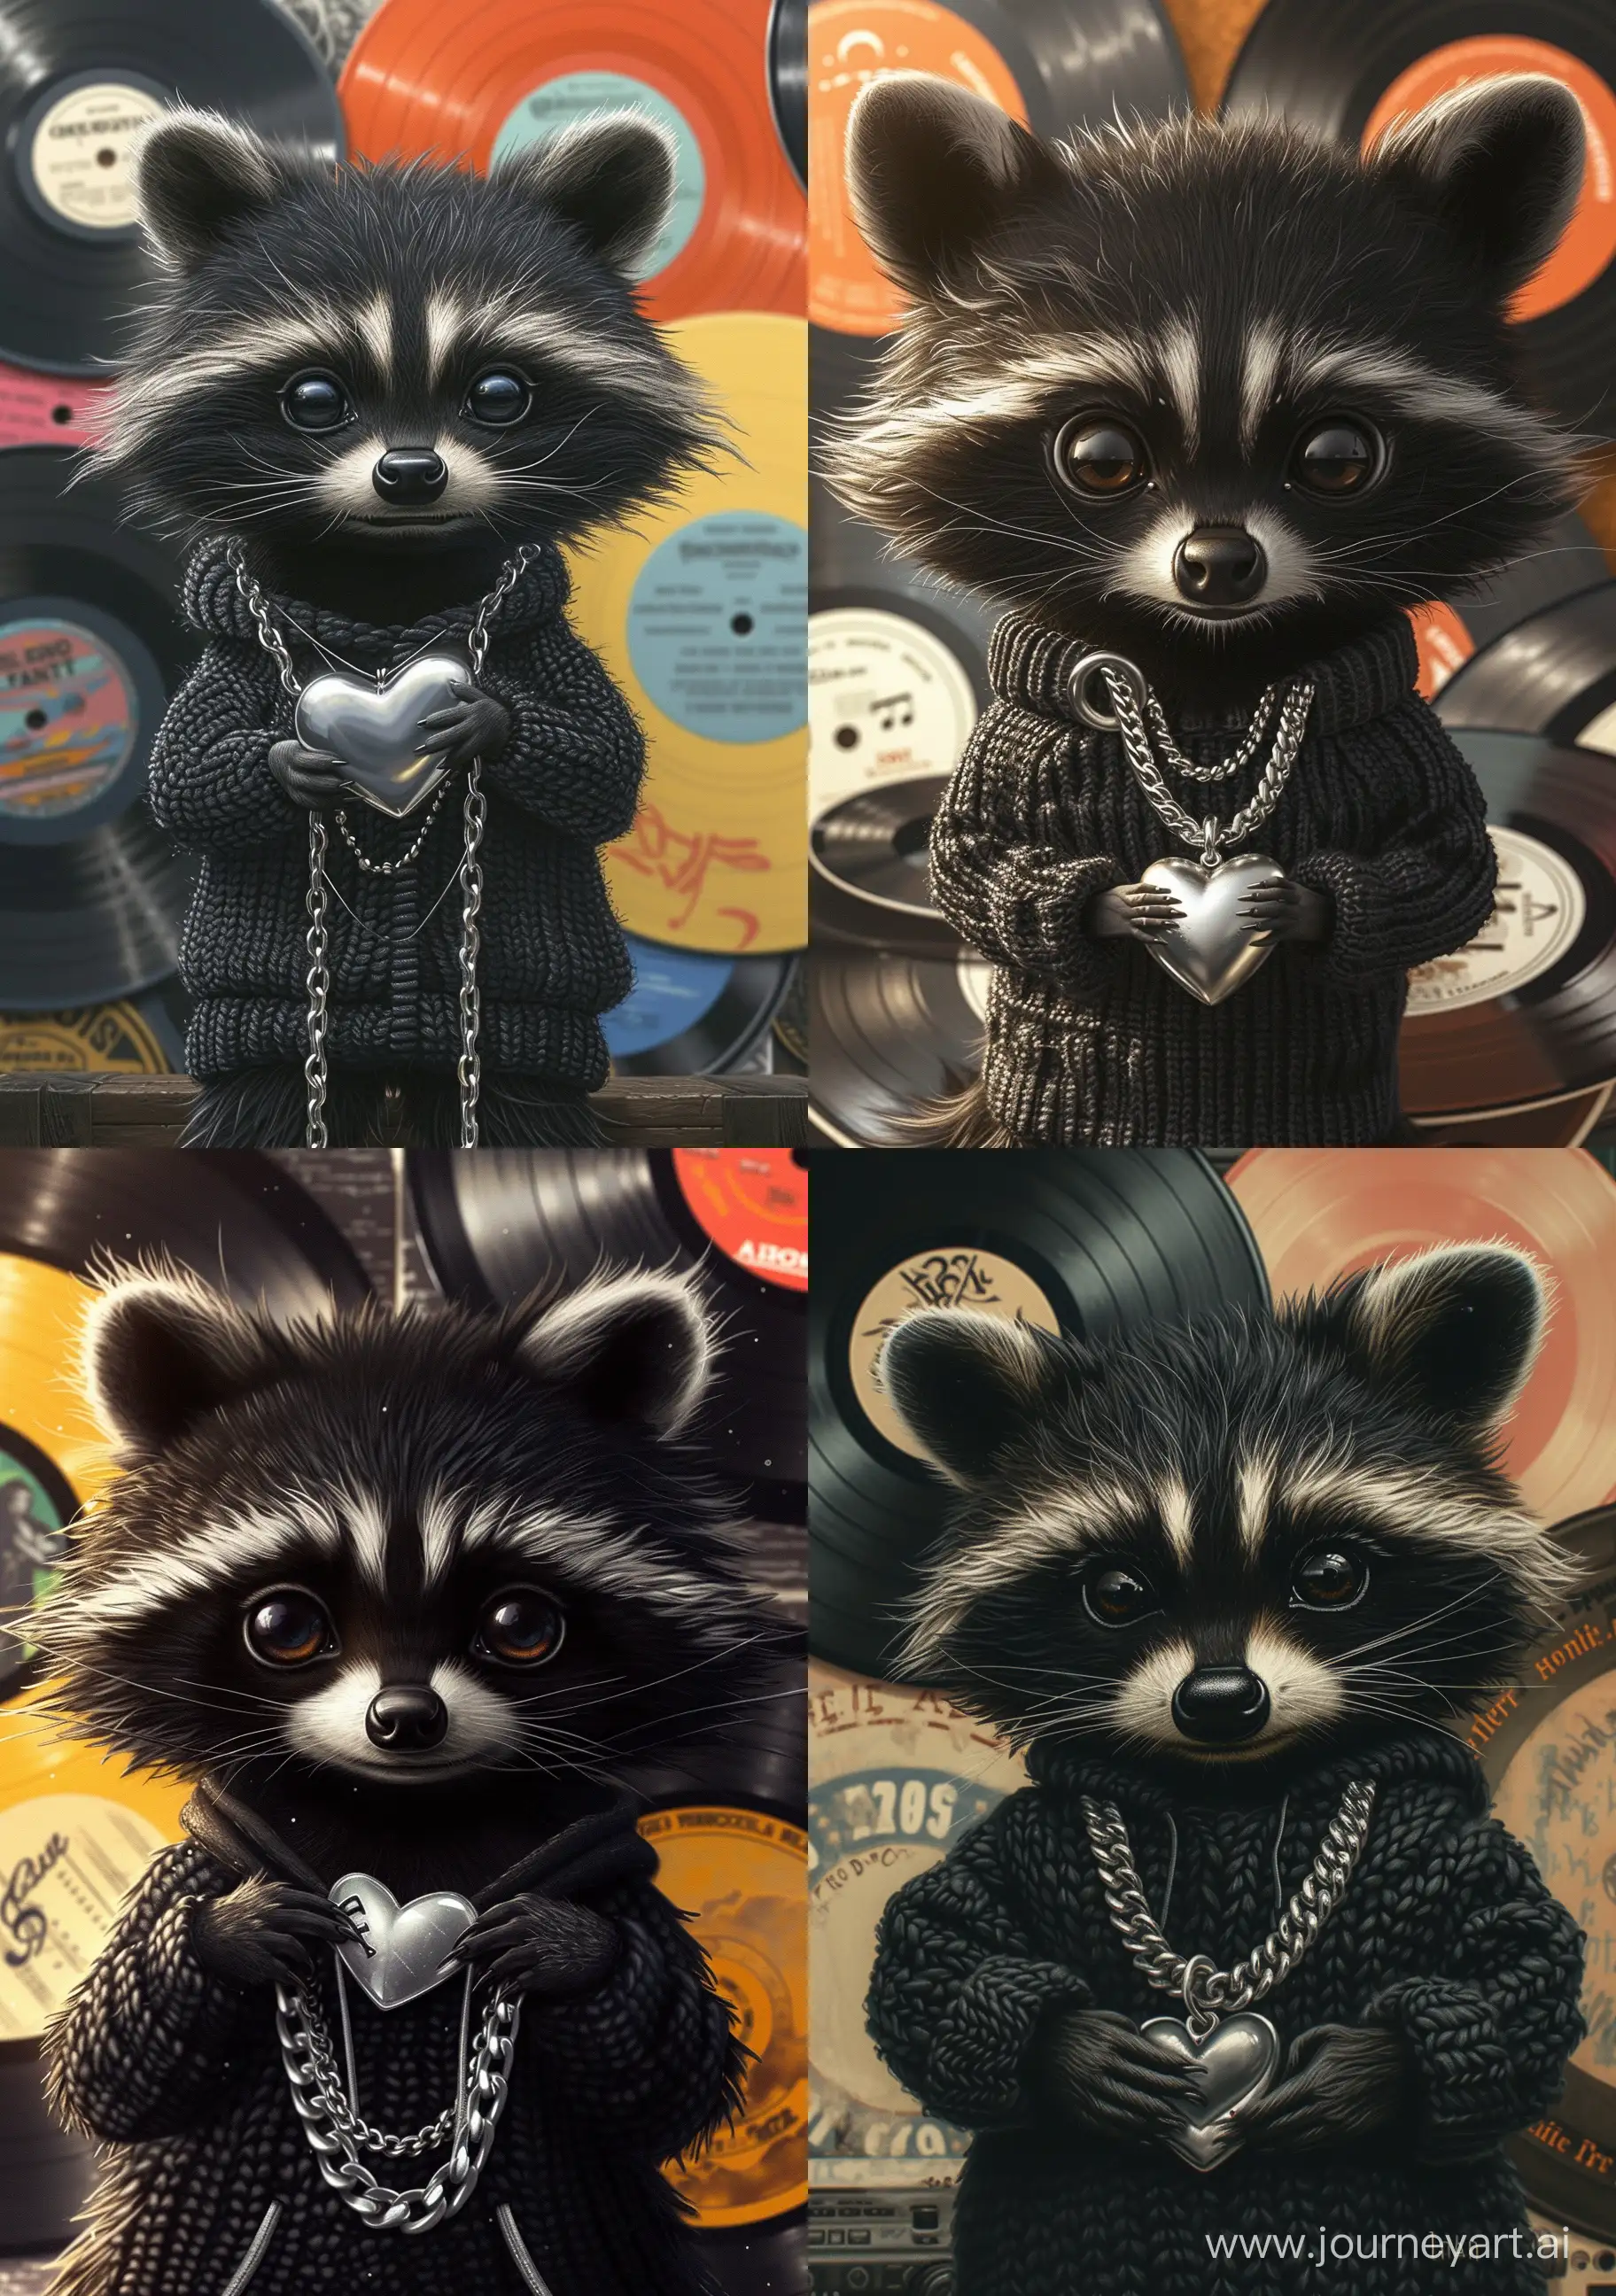 Charming-Black-Raccoon-with-Silver-Heart-Necklace-in-a-Sunny-Melody